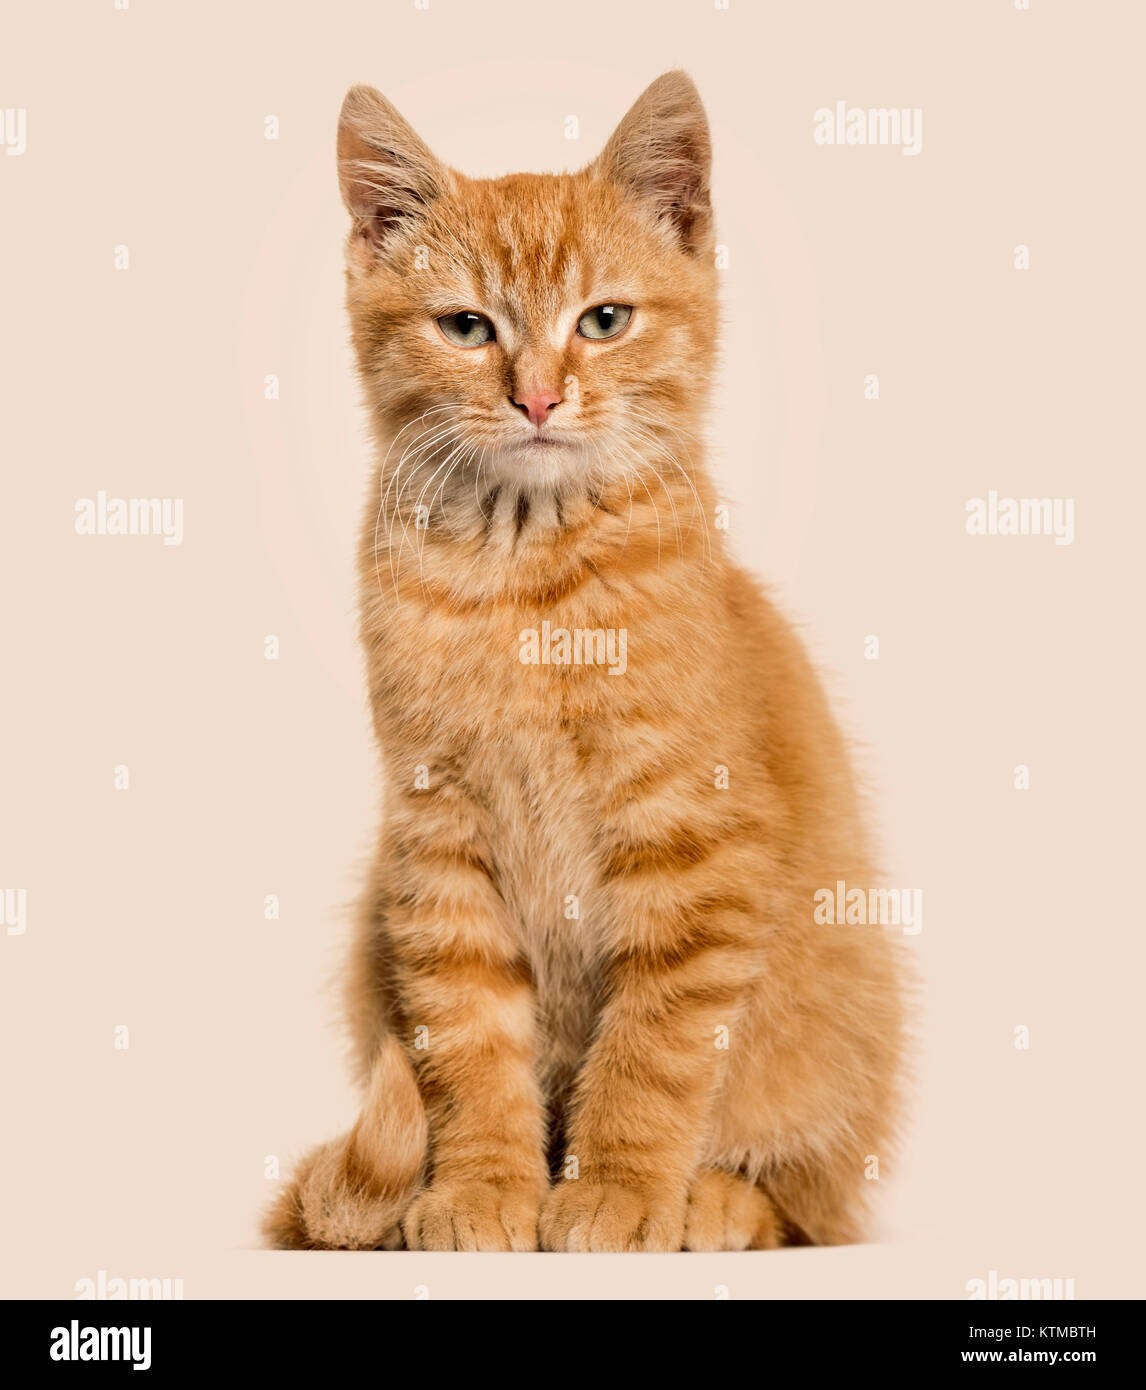 Premium Photo  Angry leopard cat saying meow, copy space